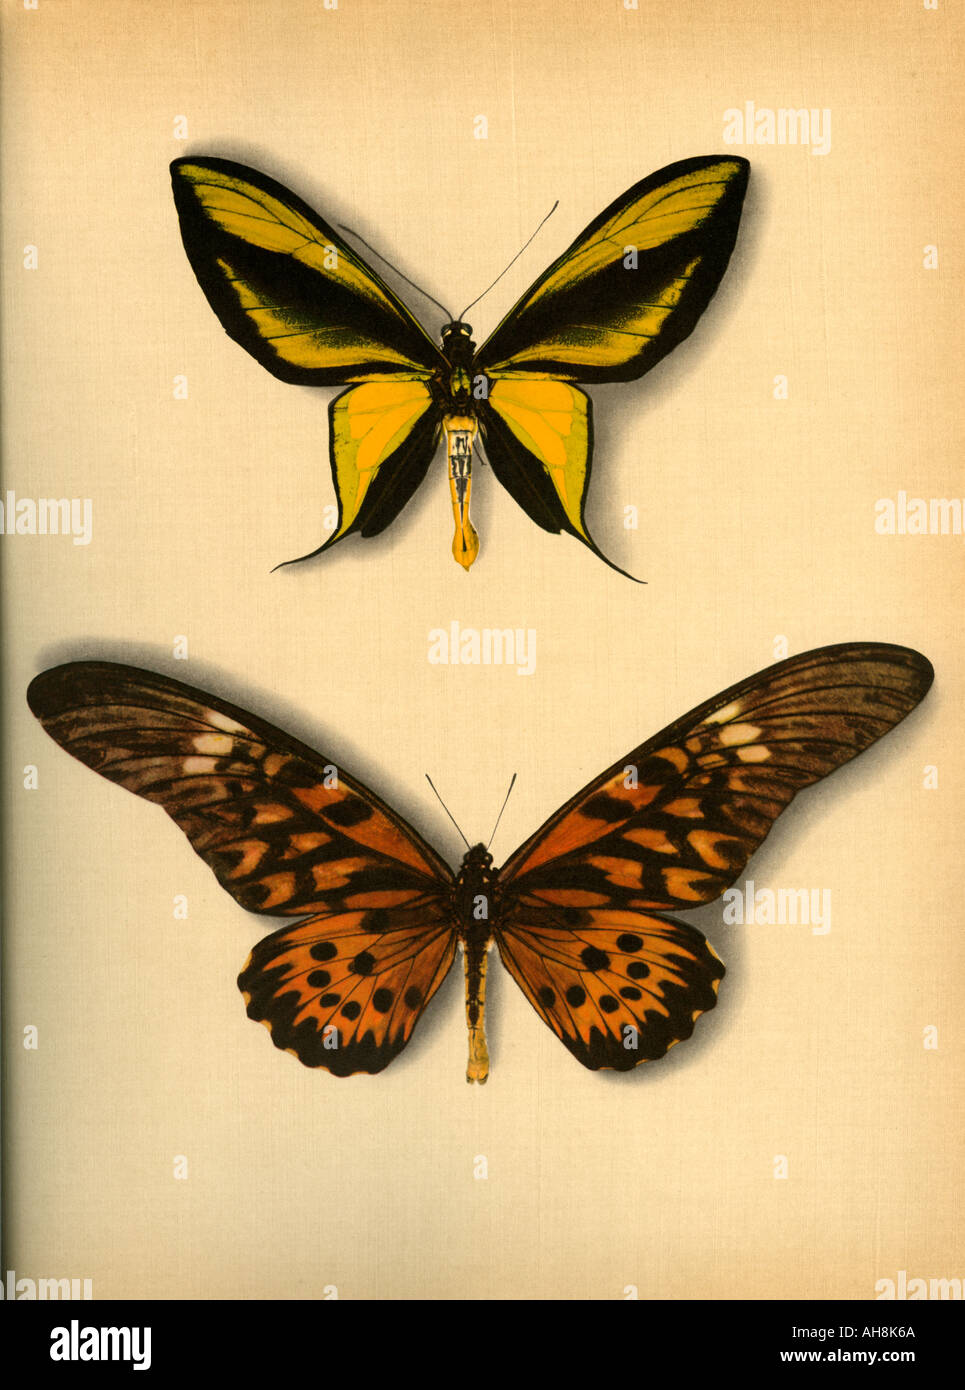 AAD71477 Two artistic colorful Butterfly mounted butterflies Stock Photo